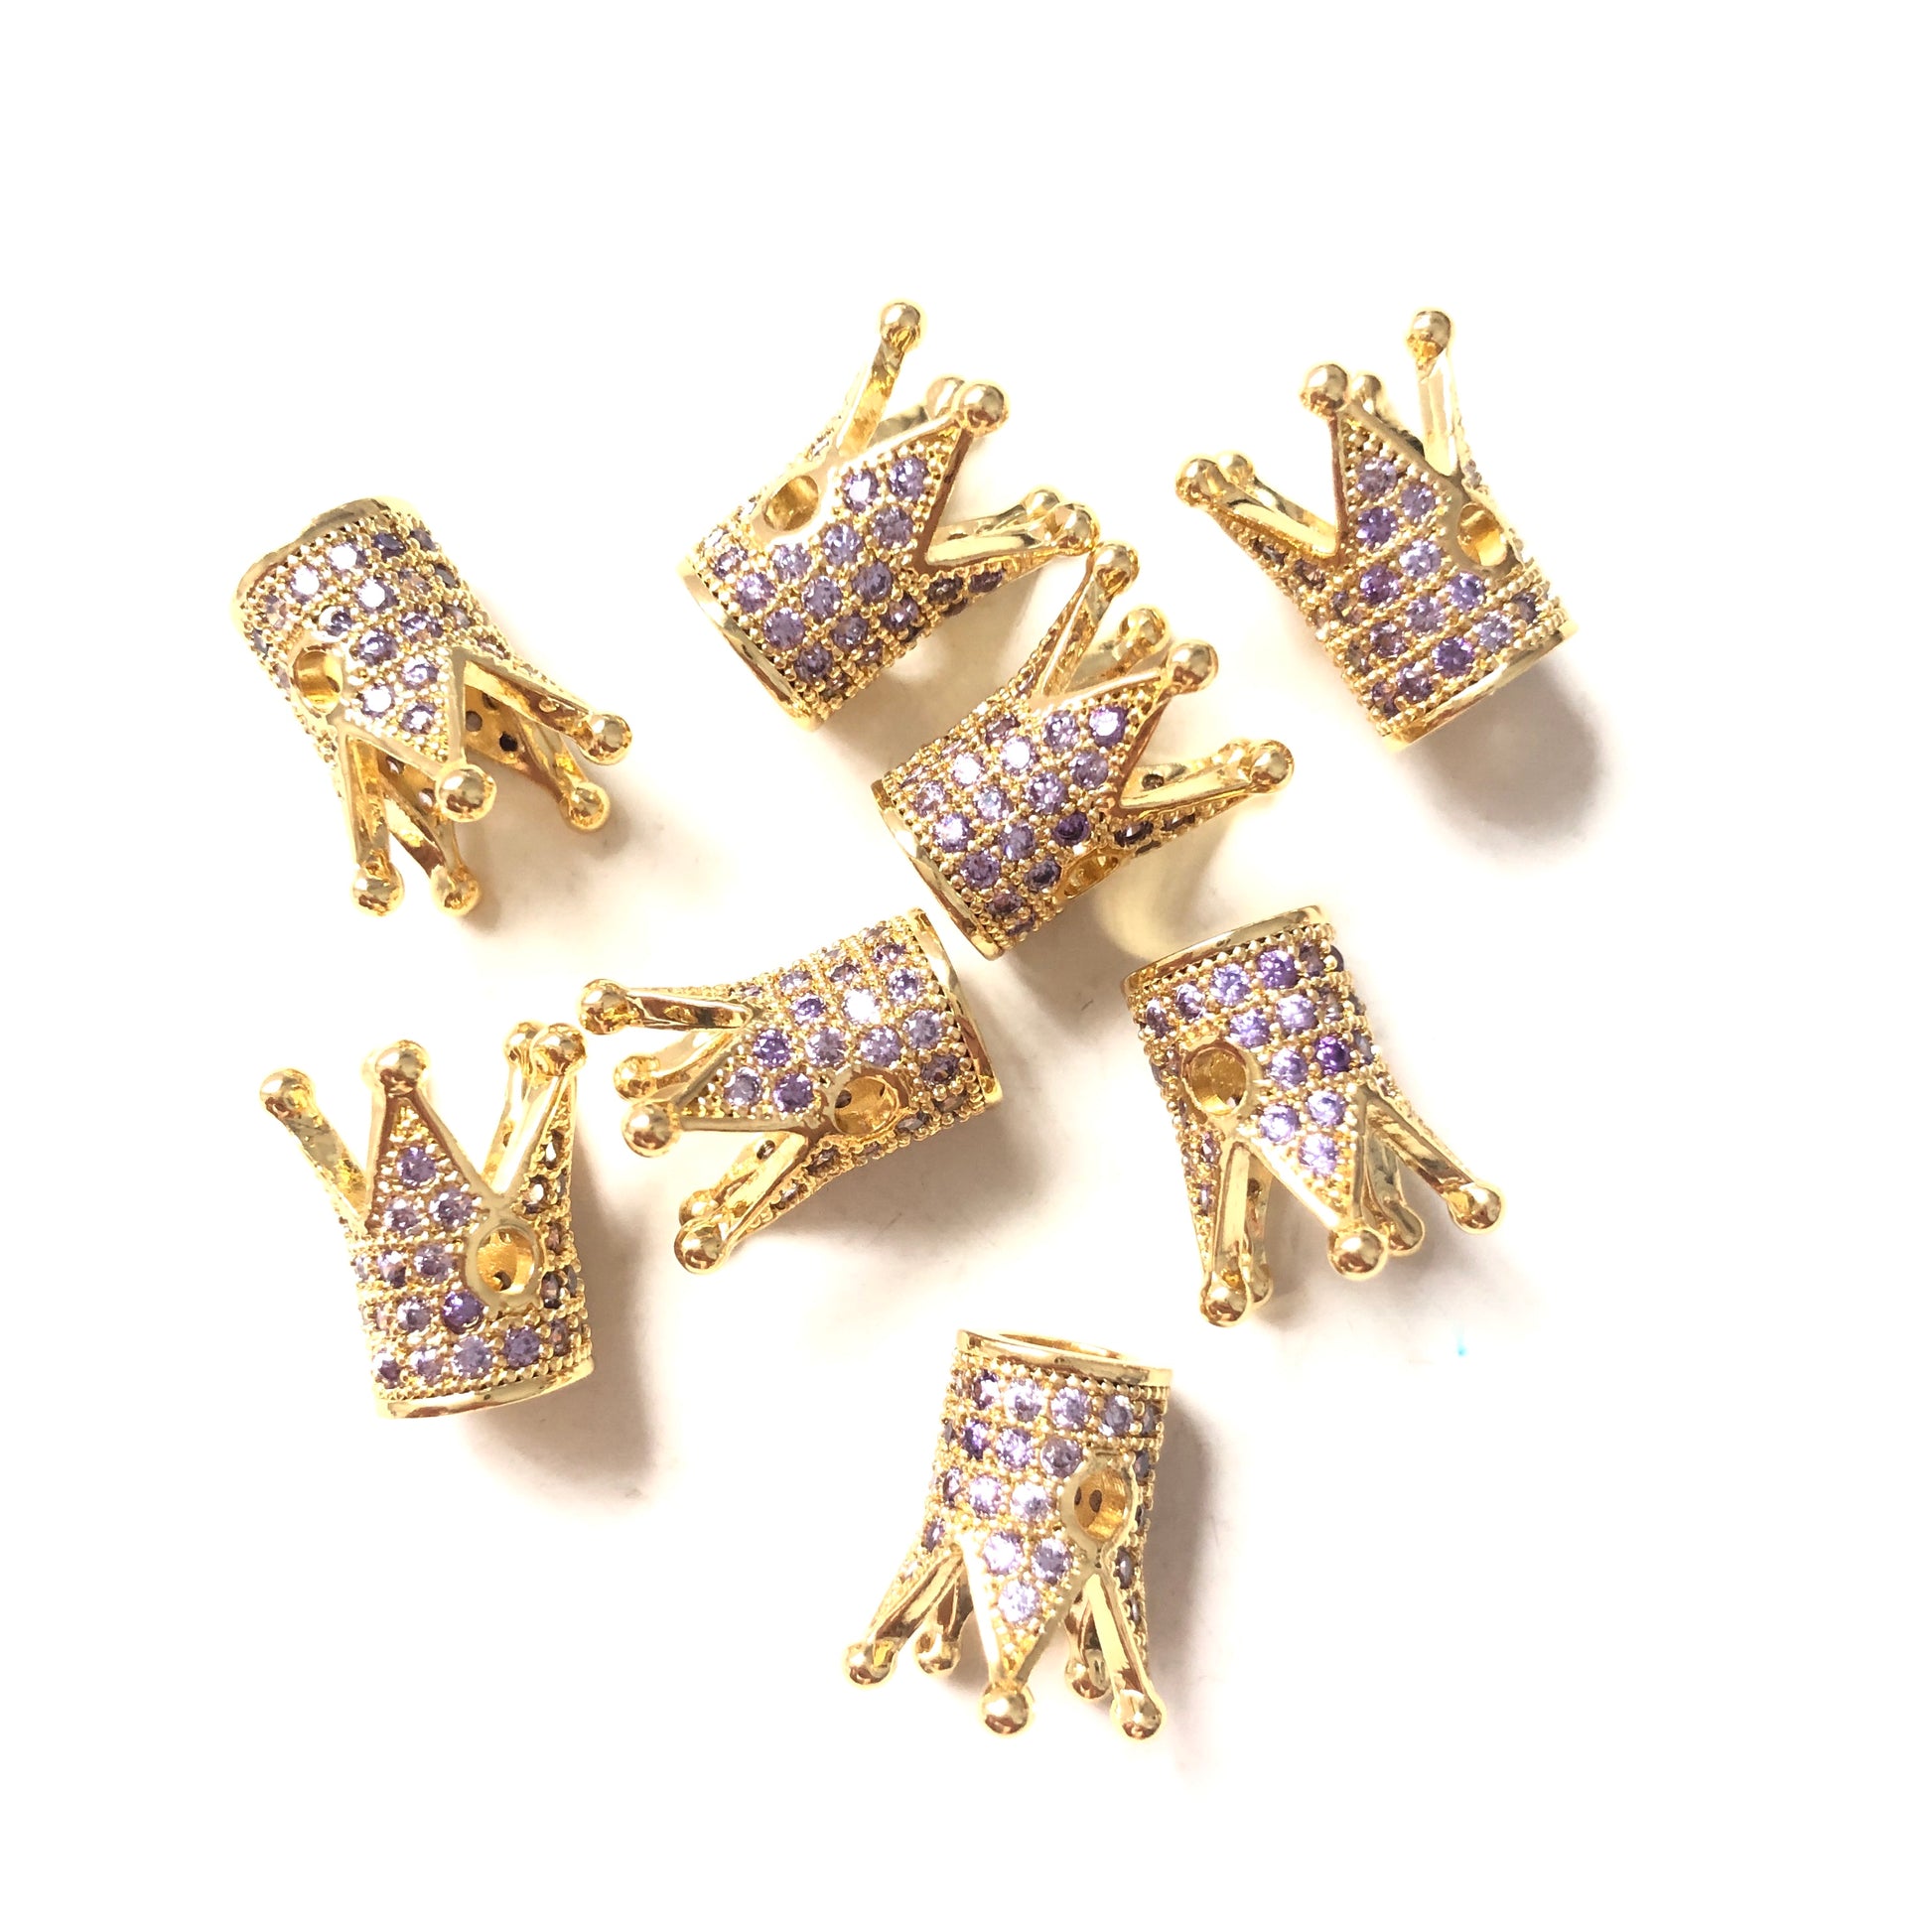 10pcs/lot Purple CZ Paved Crown Spacers Gold CZ Paved Spacers Colorful Zirconia Crown Beads Charms Beads Beyond